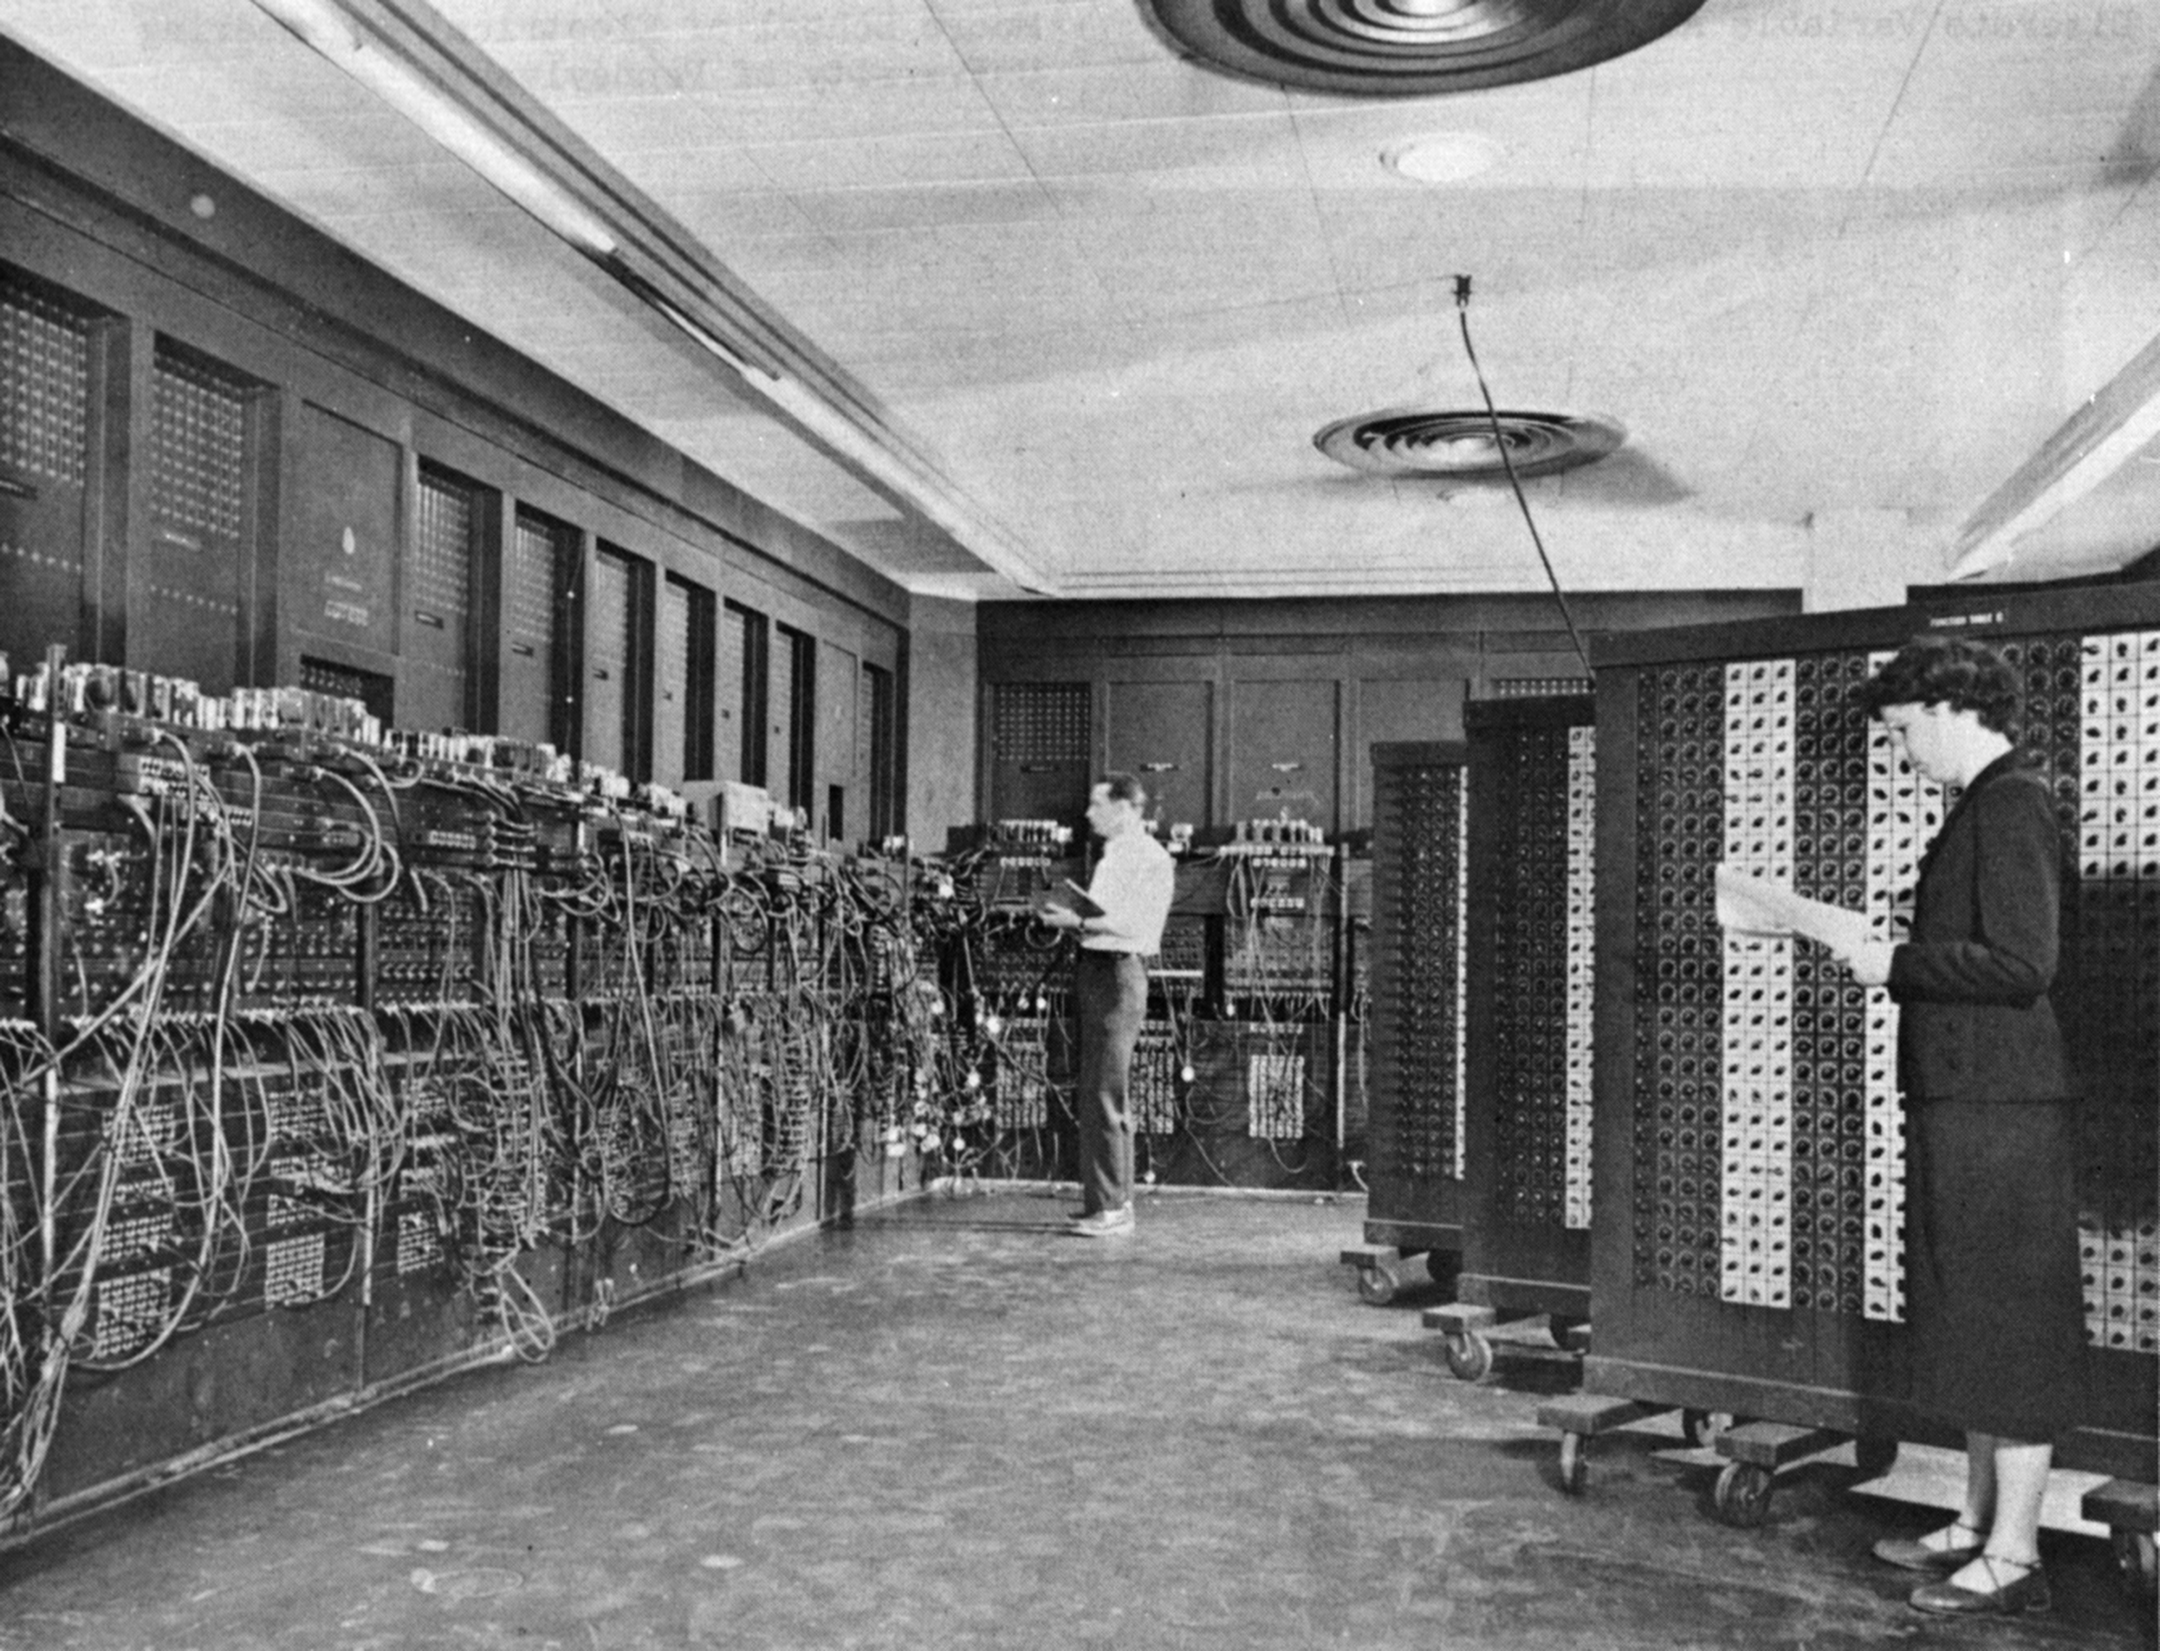 Black and white photo of a woman and man in room working on the room-sized eniac computer